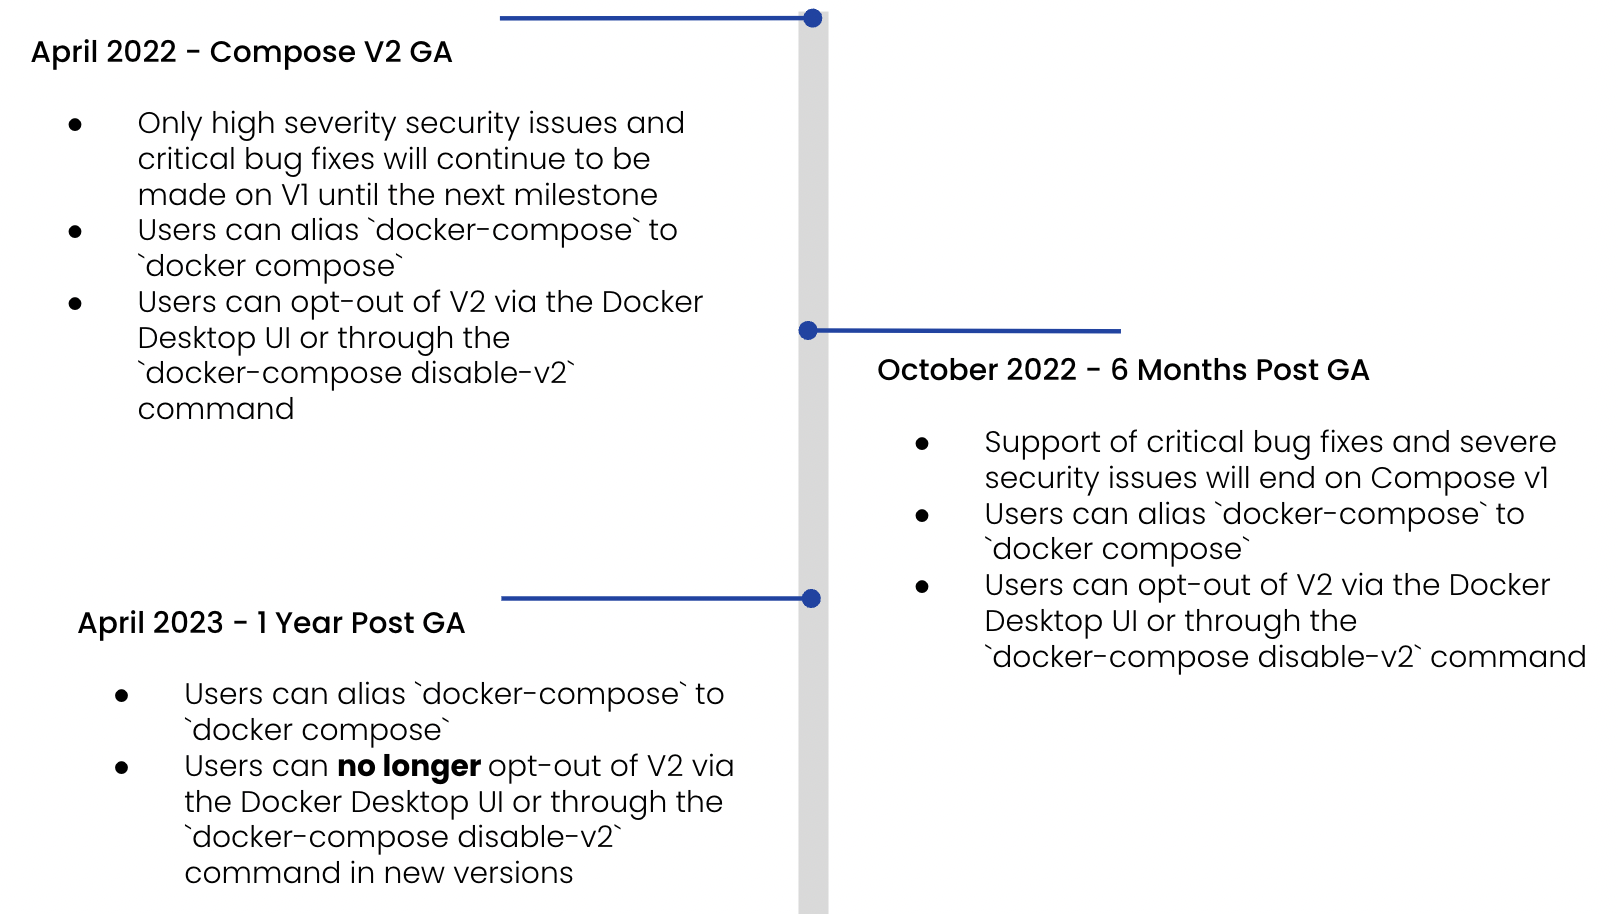 Compose v1 end-of-life timeline: april 2022, compose v2 ga. Only high severity security issues and critical bug fixes will continue to be made on v1 until the next milestone. Users can alias docker-compose to docker compose. Users can opt-out of v2 via the docker desktop ui or through the docker-compose disable-v2 command. October 2022, six months post ga. Support of critical bug fixes and severe security issues will end on compose v1. Users can alias docker-compose to docker compose. Users can opt-out of v2 via the docker desktop ui or through the docker-compose disable-v2 commands. April 2023, 1 year post ga. Users can alias docker-compose to docker compose. User can no longer opt-out of v2 via the docker desktop ui or through the docker-compose disable-v2 command in new versions.